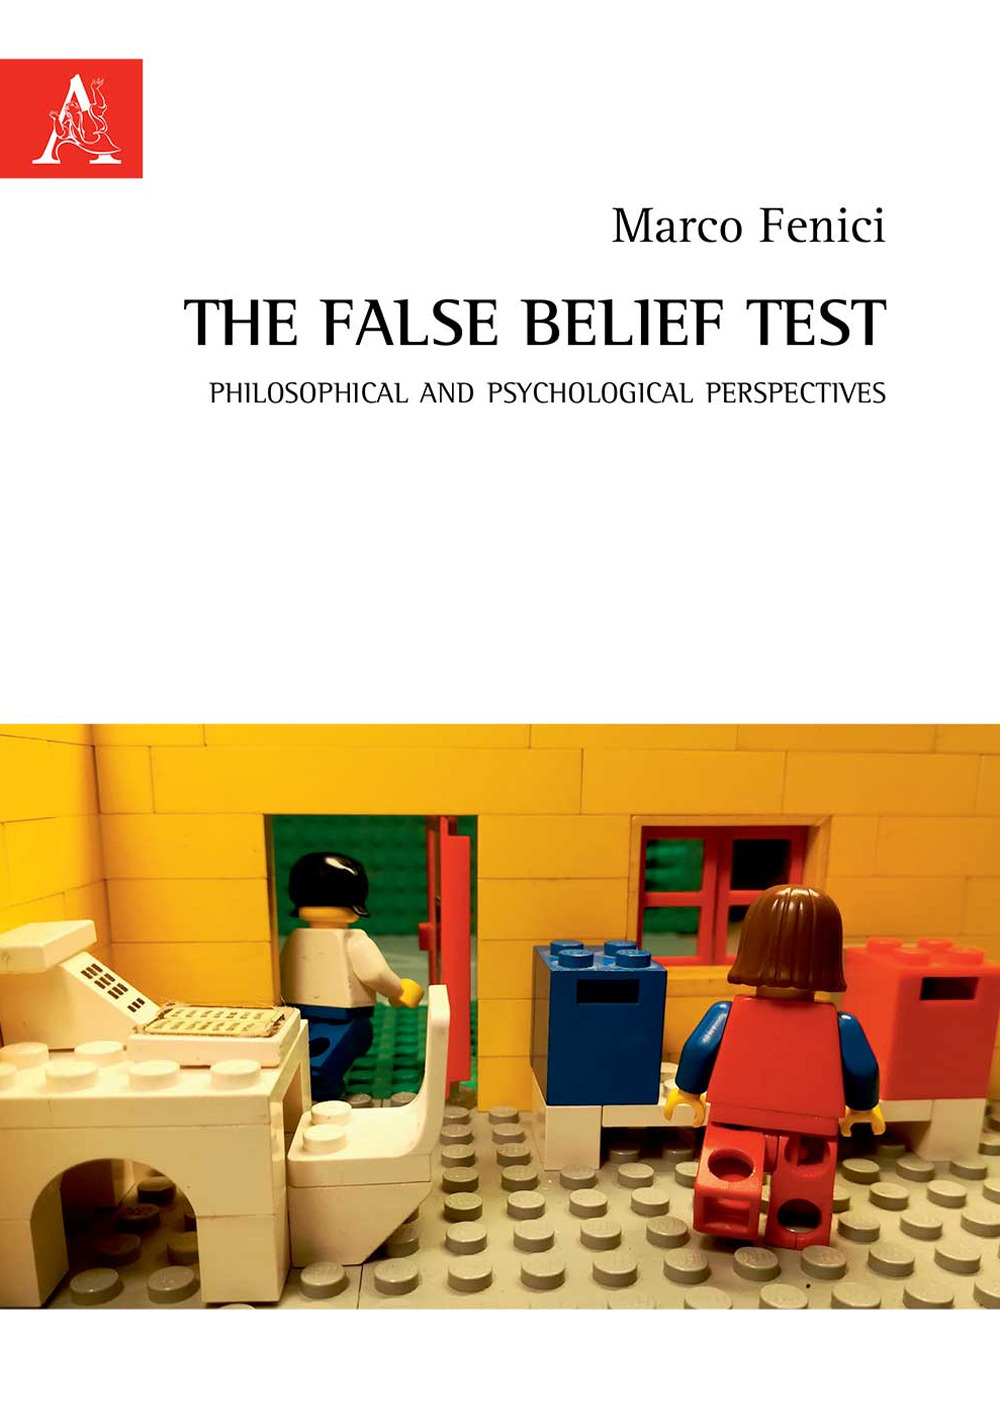 The false belief test. Philosophical and psychological perspectives